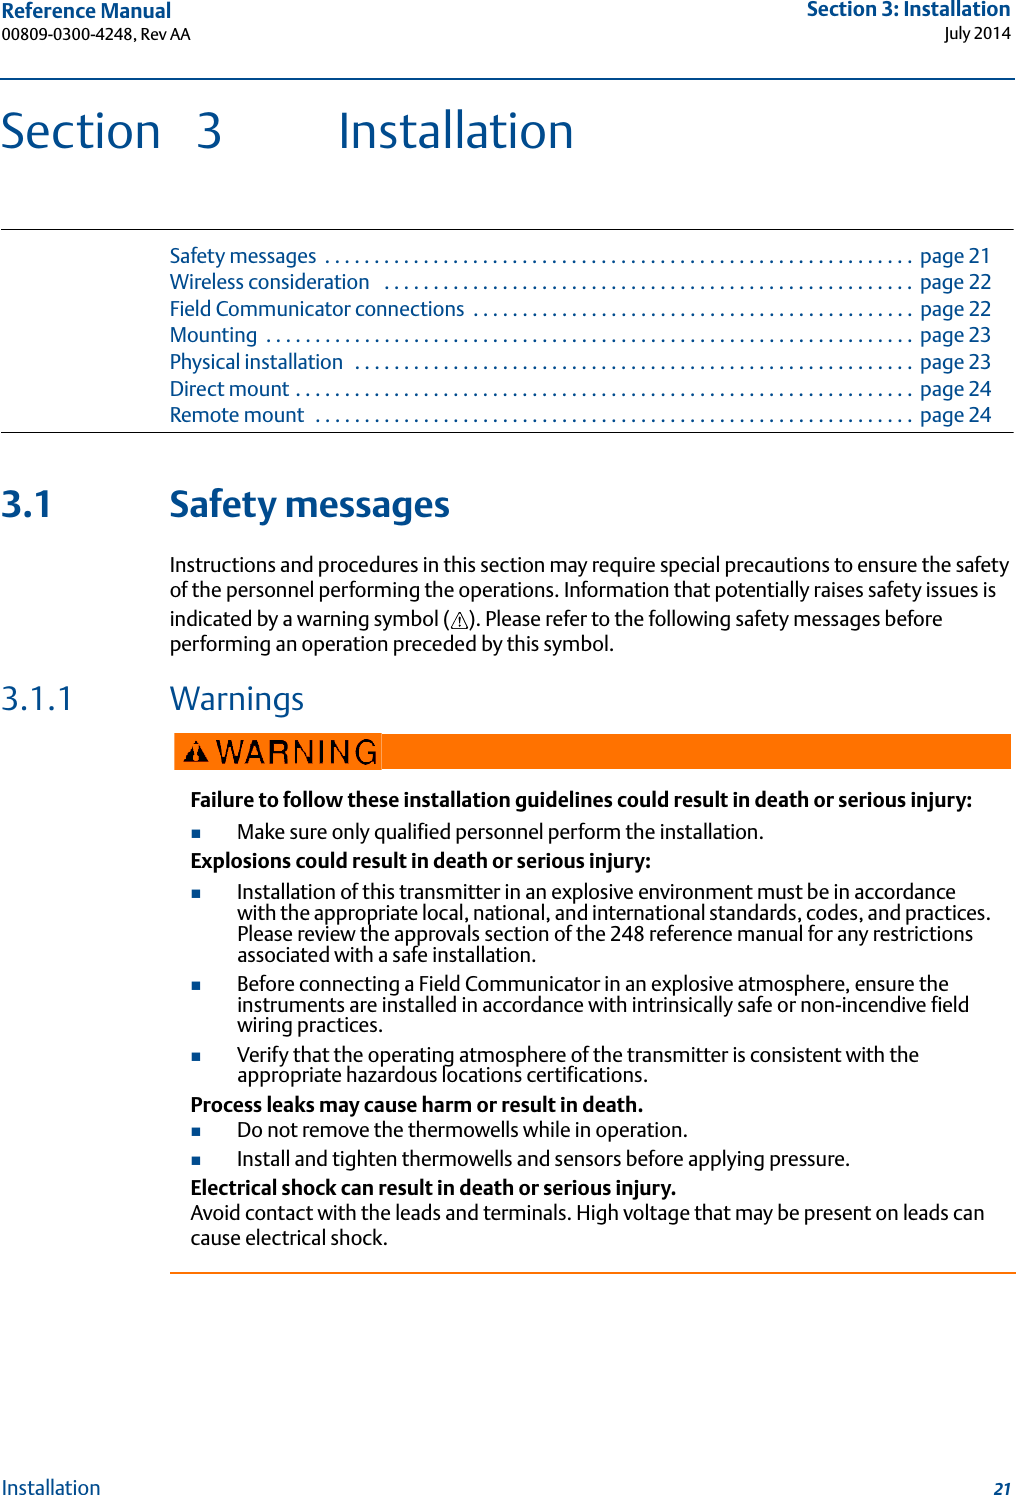 Reference Manual 00809-0300-4248, Rev AASection 3: InstallationJuly 201421InstallationSection 3 InstallationSafety messages  . . . . . . . . . . . . . . . . . . . . . . . . . . . . . . . . . . . . . . . . . . . . . . . . . . . . . . . . . . . .  page 21Wireless consideration   . . . . . . . . . . . . . . . . . . . . . . . . . . . . . . . . . . . . . . . . . . . . . . . . . . . . . .  page 22Field Communicator connections  . . . . . . . . . . . . . . . . . . . . . . . . . . . . . . . . . . . . . . . . . . . . .  page 22Mounting  . . . . . . . . . . . . . . . . . . . . . . . . . . . . . . . . . . . . . . . . . . . . . . . . . . . . . . . . . . . . . . . . . .  page 23Physical installation   . . . . . . . . . . . . . . . . . . . . . . . . . . . . . . . . . . . . . . . . . . . . . . . . . . . . . . . . .  page 23Direct mount . . . . . . . . . . . . . . . . . . . . . . . . . . . . . . . . . . . . . . . . . . . . . . . . . . . . . . . . . . . . . . .  page 24Remote mount  . . . . . . . . . . . . . . . . . . . . . . . . . . . . . . . . . . . . . . . . . . . . . . . . . . . . . . . . . . . . .  page 243.1 Safety messagesInstructions and procedures in this section may require special precautions to ensure the safety of the personnel performing the operations. Information that potentially raises safety issues is indicated by a warning symbol ( ). Please refer to the following safety messages before performing an operation preceded by this symbol.3.1.1 WarningsFailure to follow these installation guidelines could result in death or serious injury:Make sure only qualified personnel perform the installation.Explosions could result in death or serious injury: Installation of this transmitter in an explosive environment must be in accordance with the appropriate local, national, and international standards, codes, and practices. Please review the approvals section of the 248 reference manual for any restrictions associated with a safe installation. Before connecting a Field Communicator in an explosive atmosphere, ensure the instruments are installed in accordance with intrinsically safe or non-incendive field wiring practices.Verify that the operating atmosphere of the transmitter is consistent with the appropriate hazardous locations certifications.Process leaks may cause harm or result in death. Do not remove the thermowells while in operation.Install and tighten thermowells and sensors before applying pressure.Electrical shock can result in death or serious injury.Avoid contact with the leads and terminals. High voltage that may be present on leads can cause electrical shock.